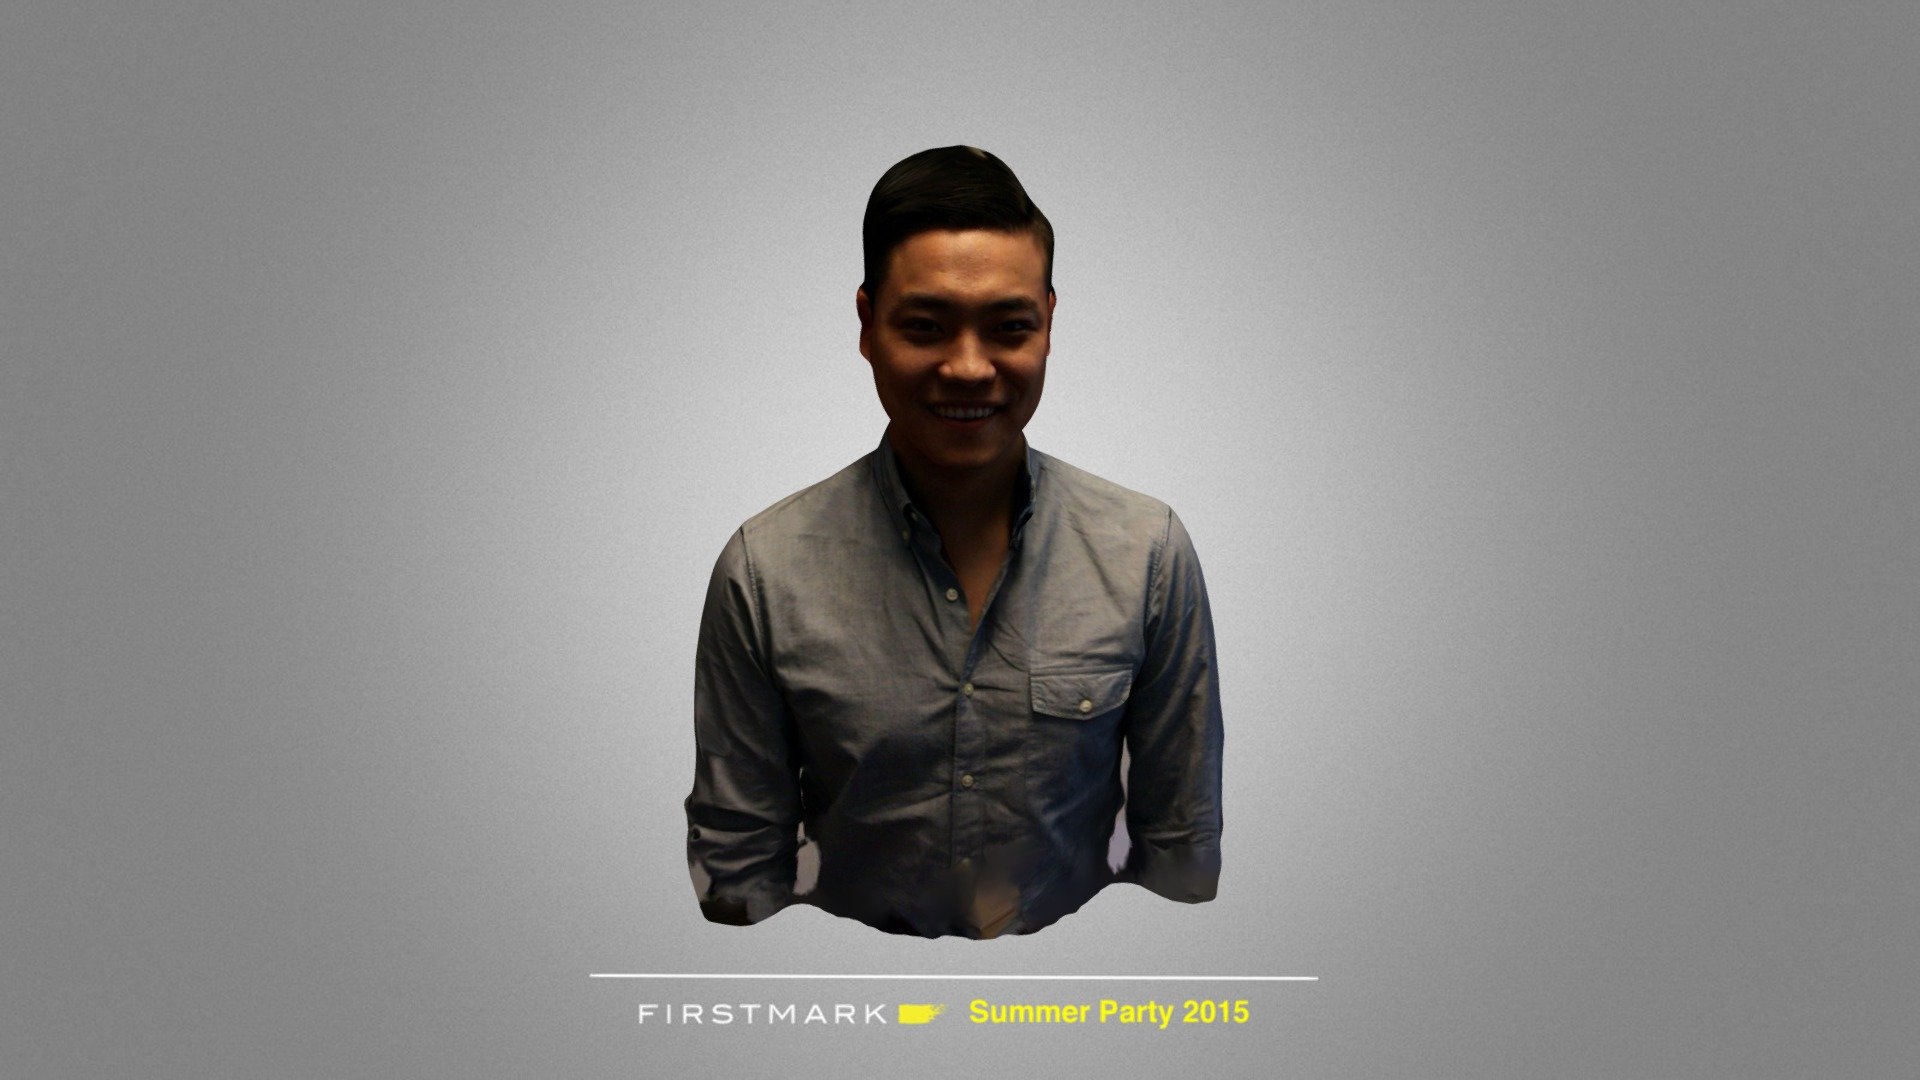 Jim Hao from FirstMark